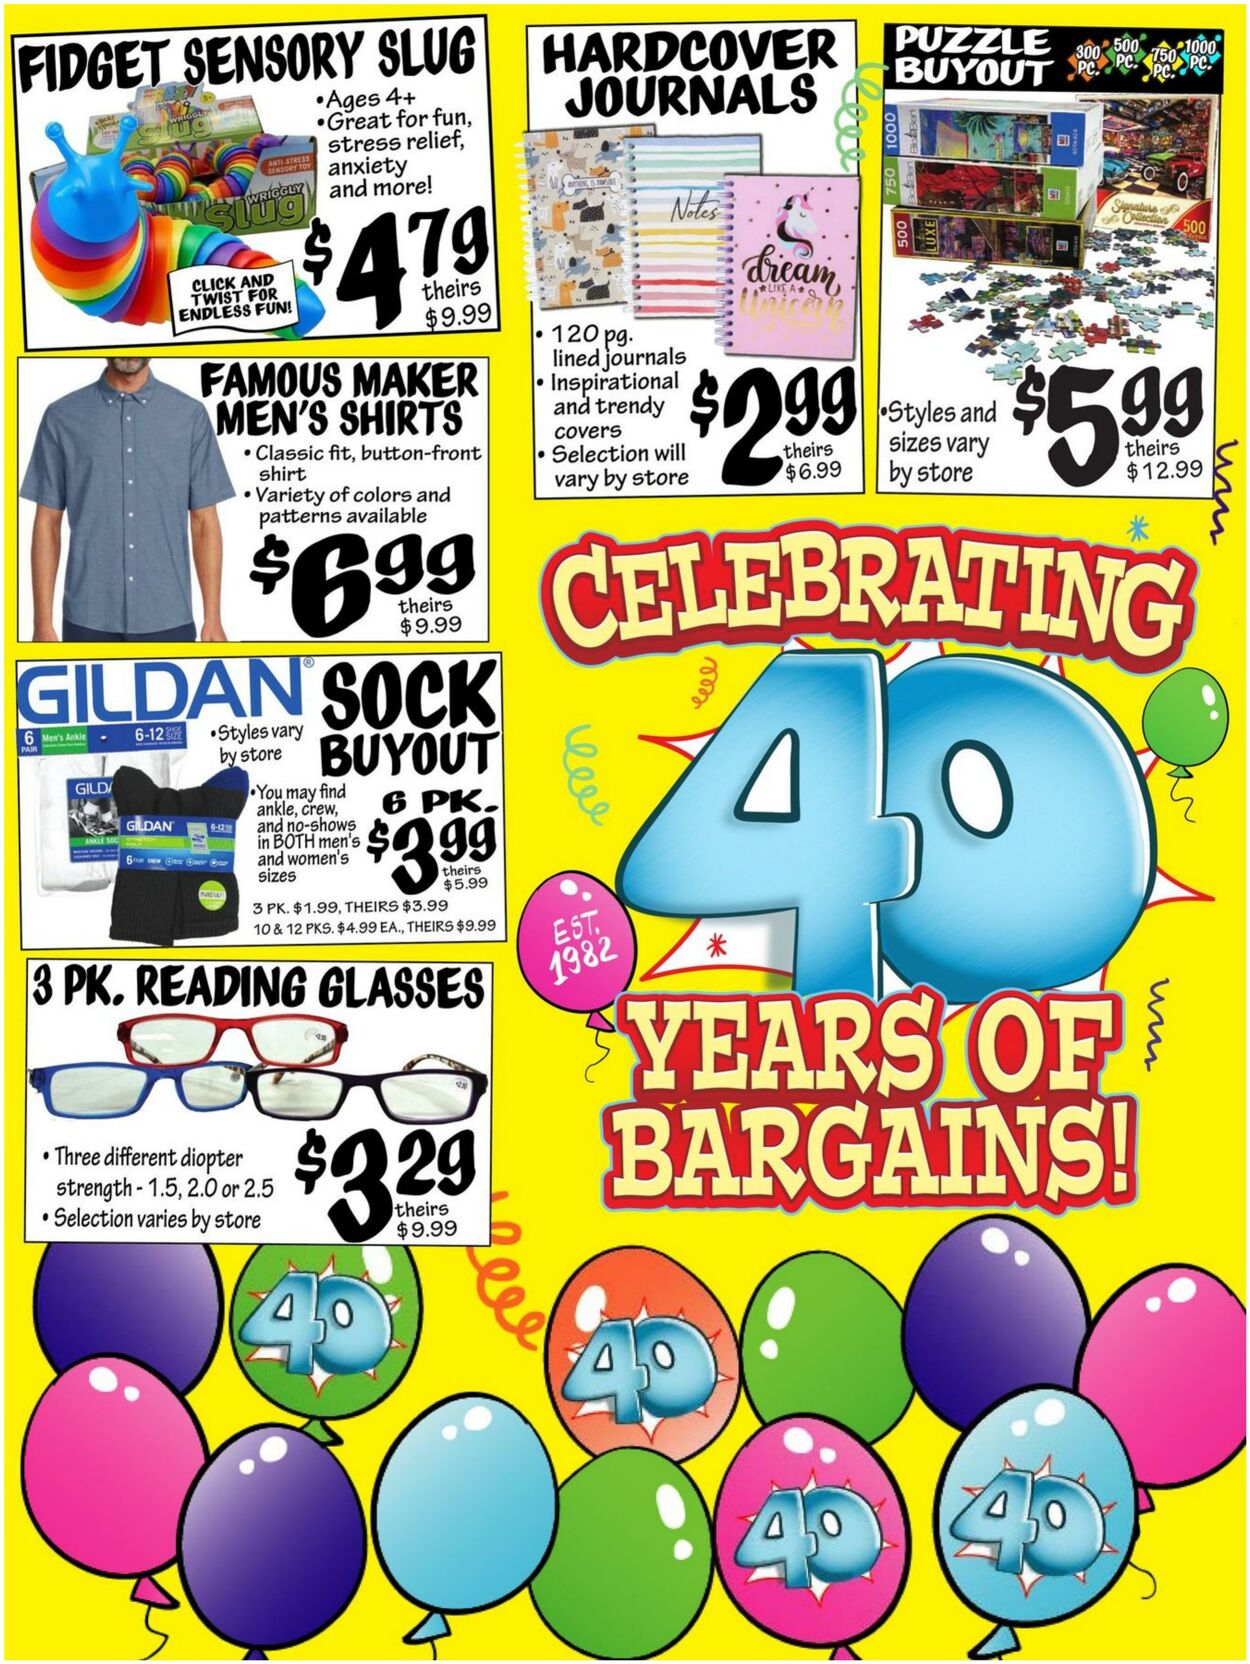 Weekly ad Ollie's 07/28/2022 - 08/02/2022